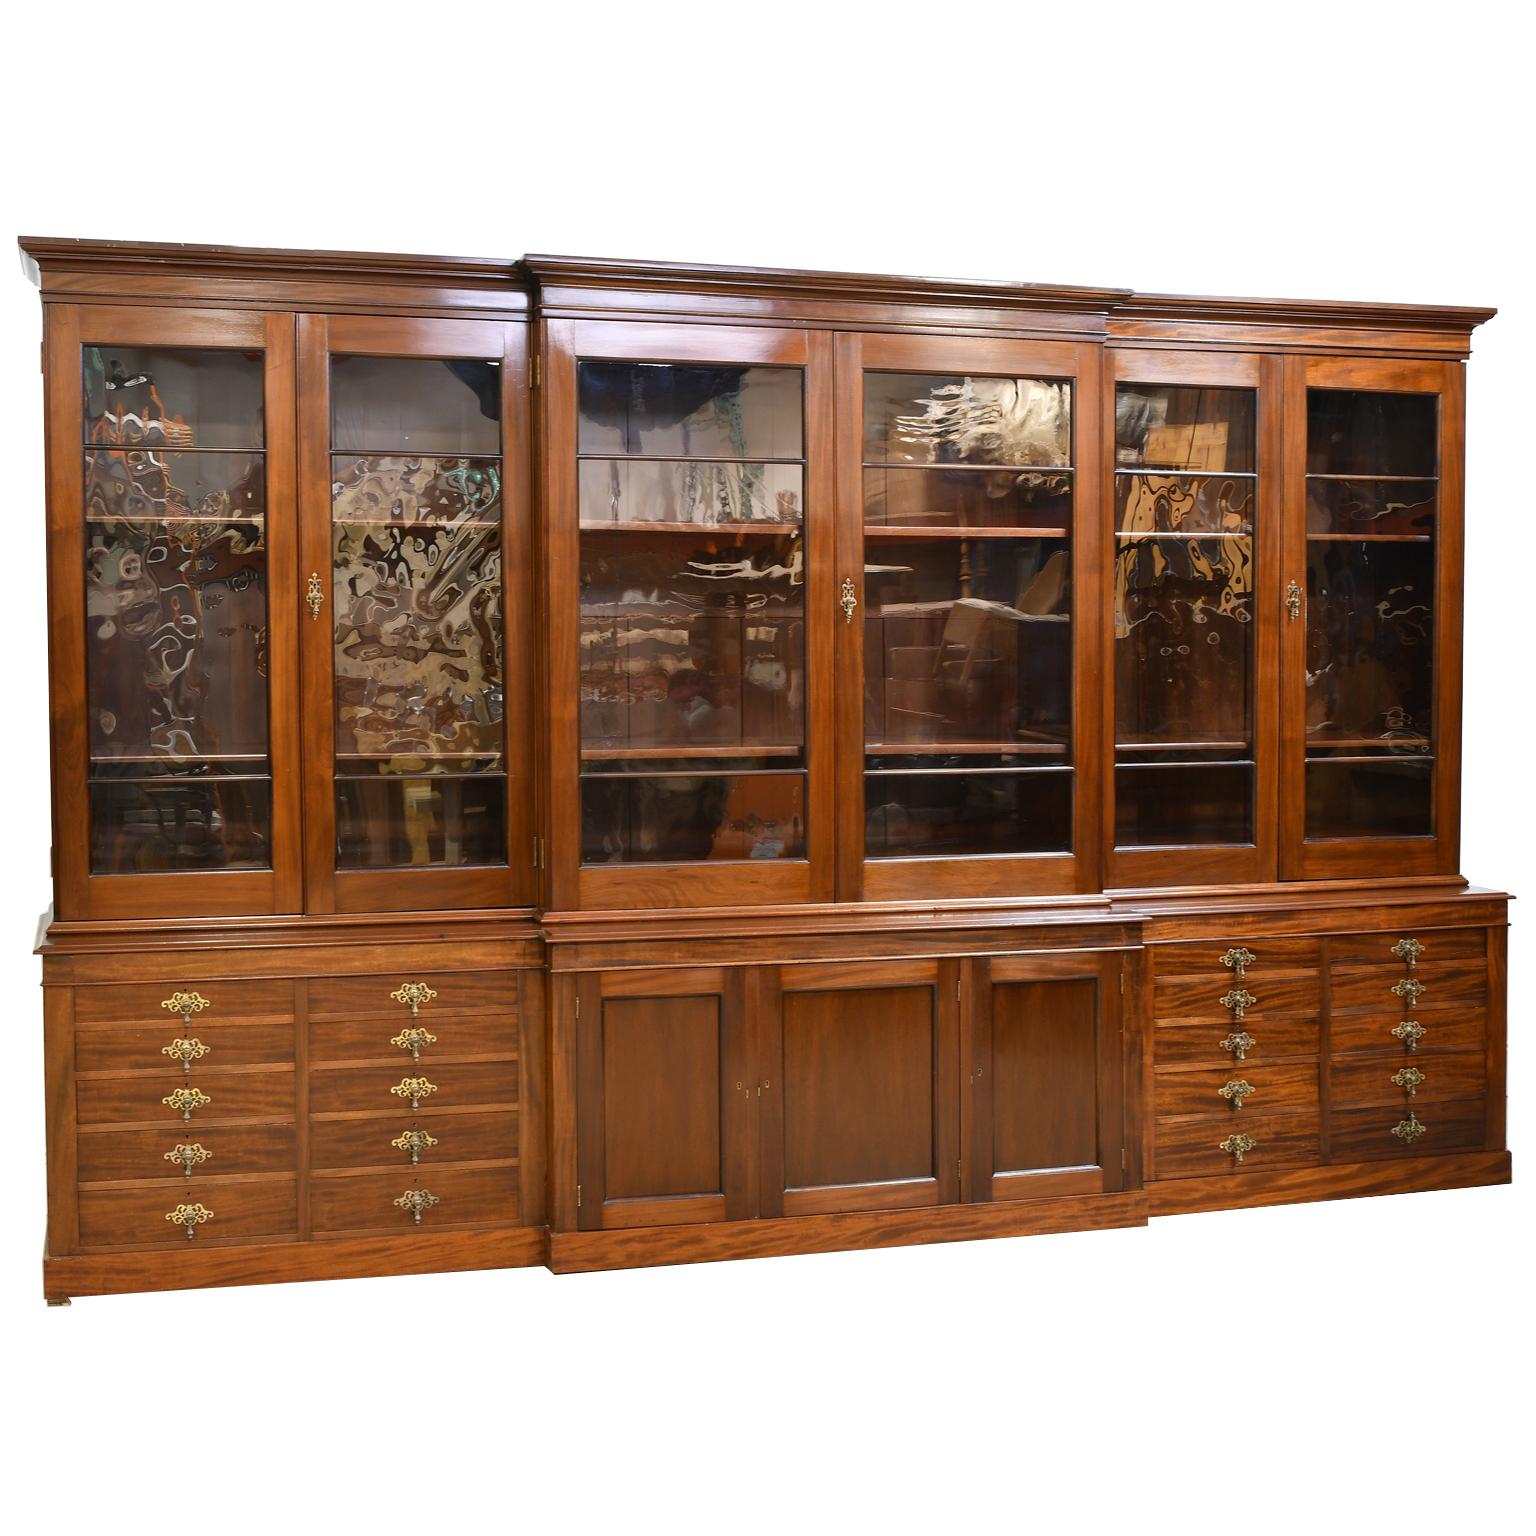 Polished Antique English Break-Front Bibliotheque Bookcase in Mahogany, circa 1870 For Sale